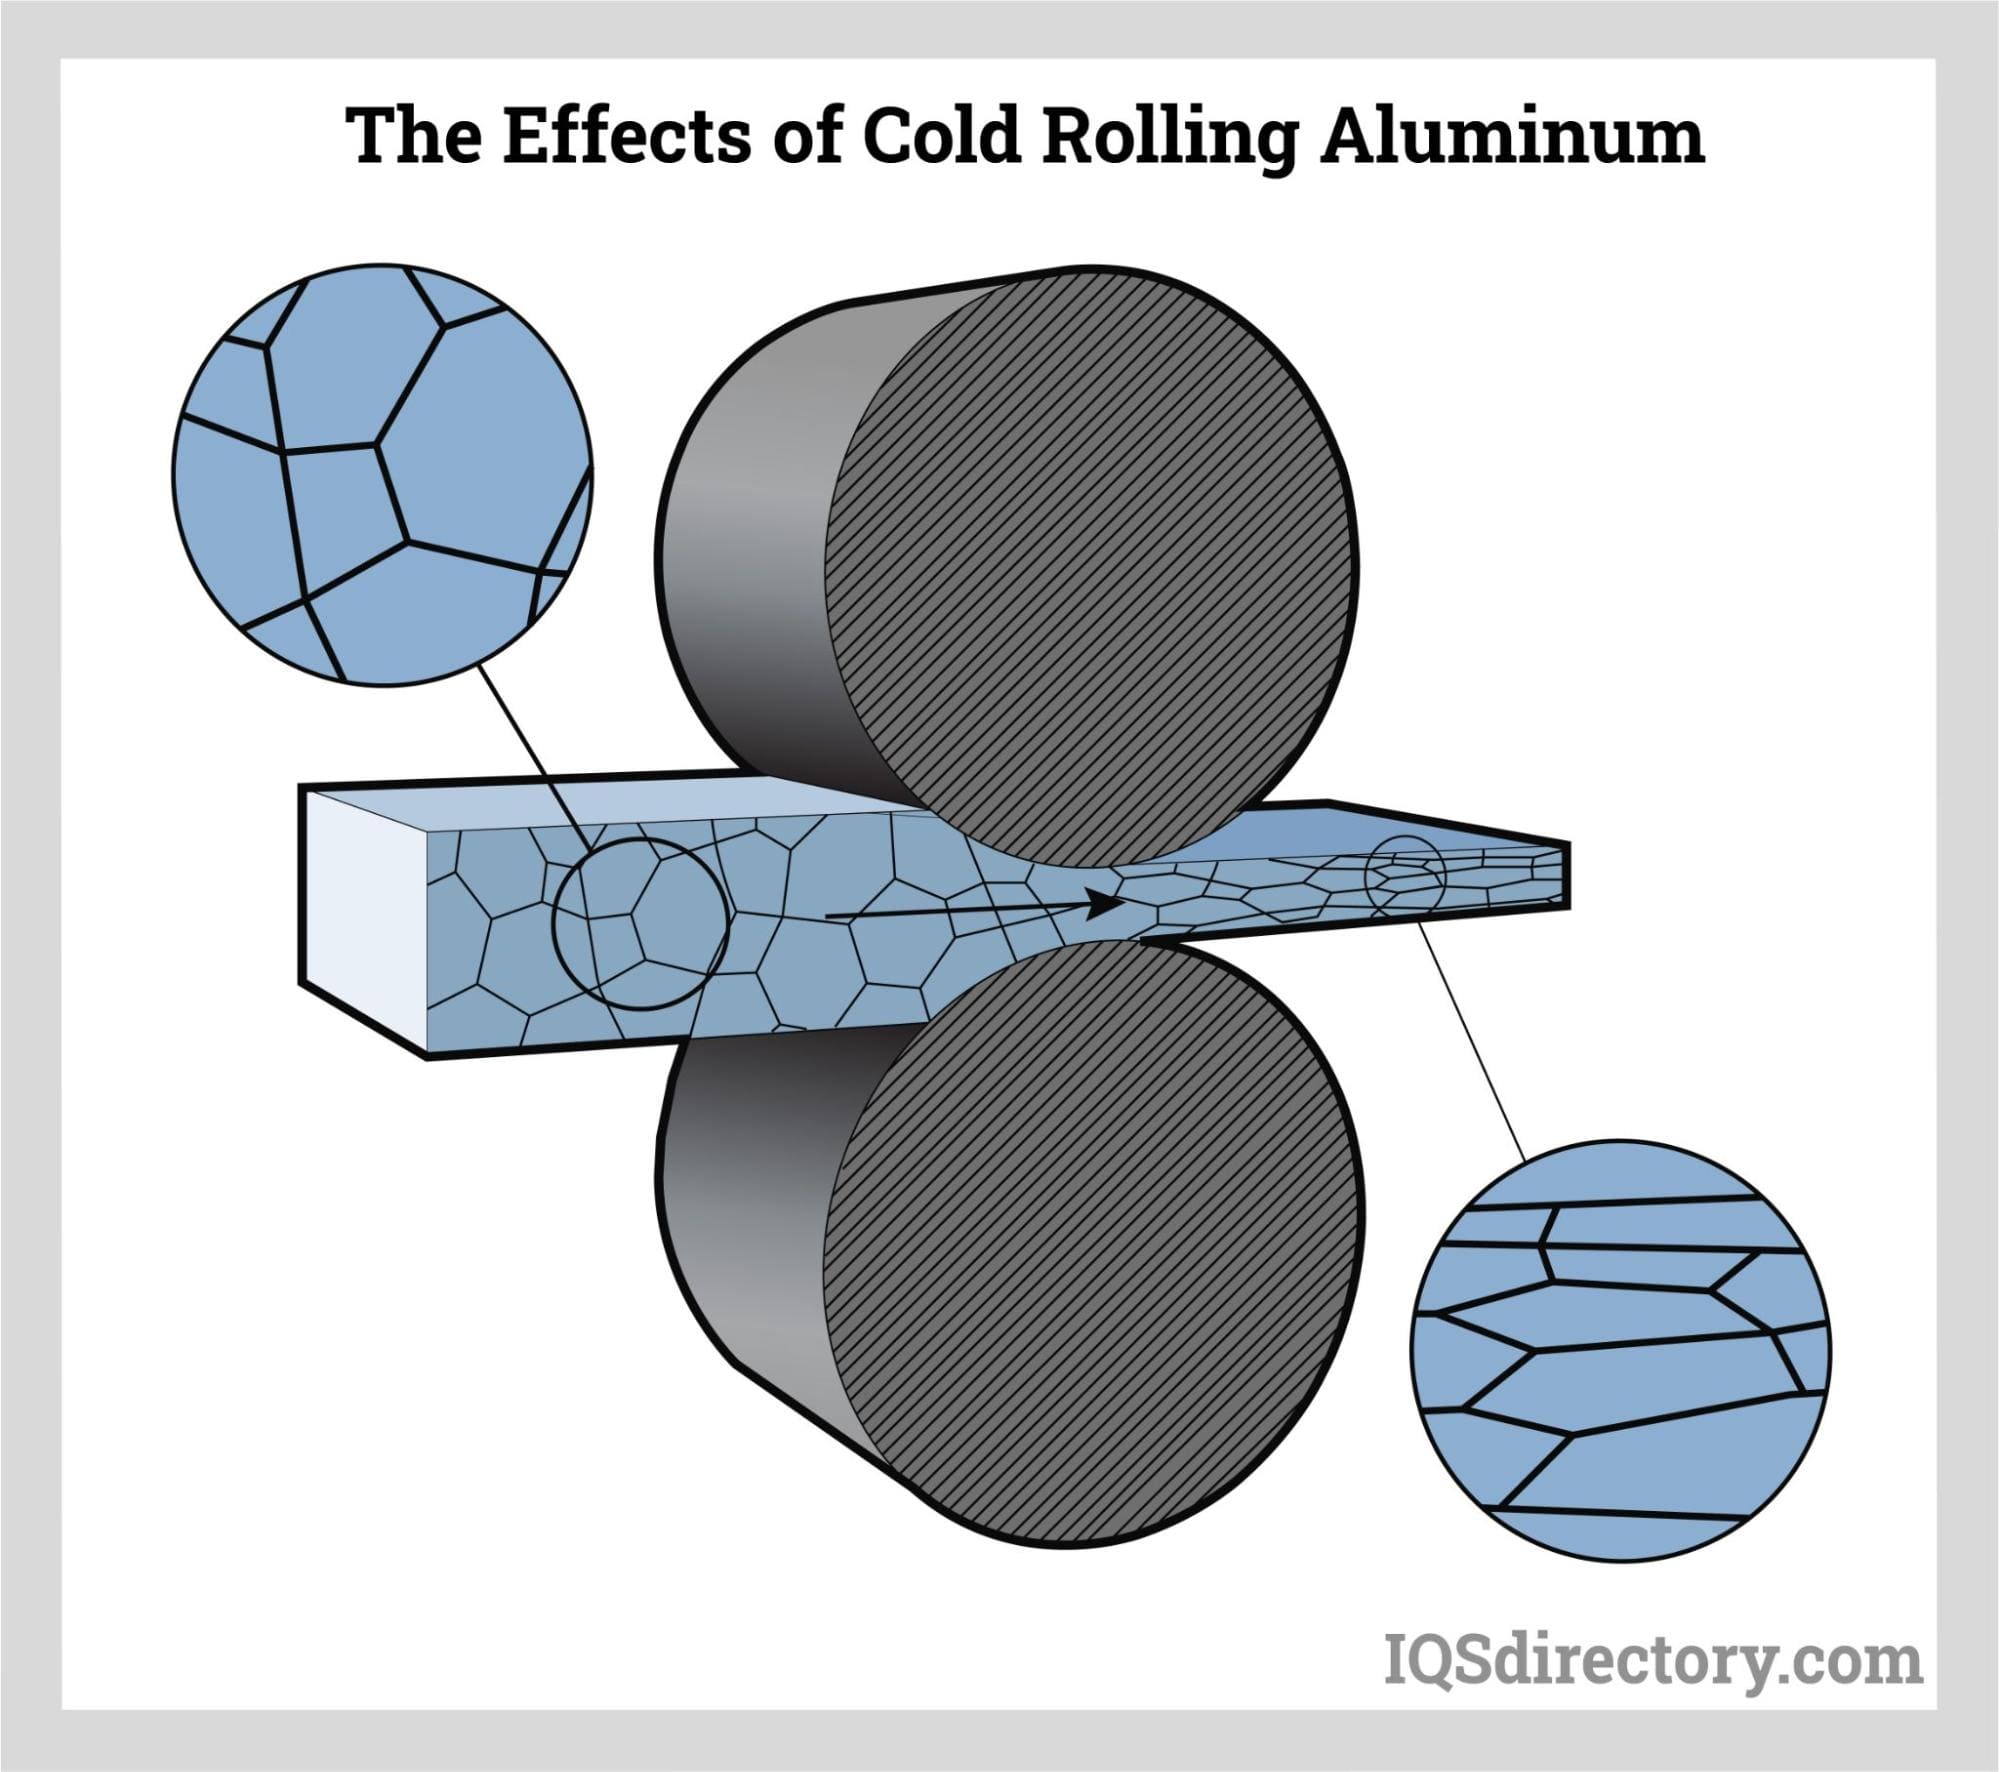 The Effects of Cold Rolling Aluminum